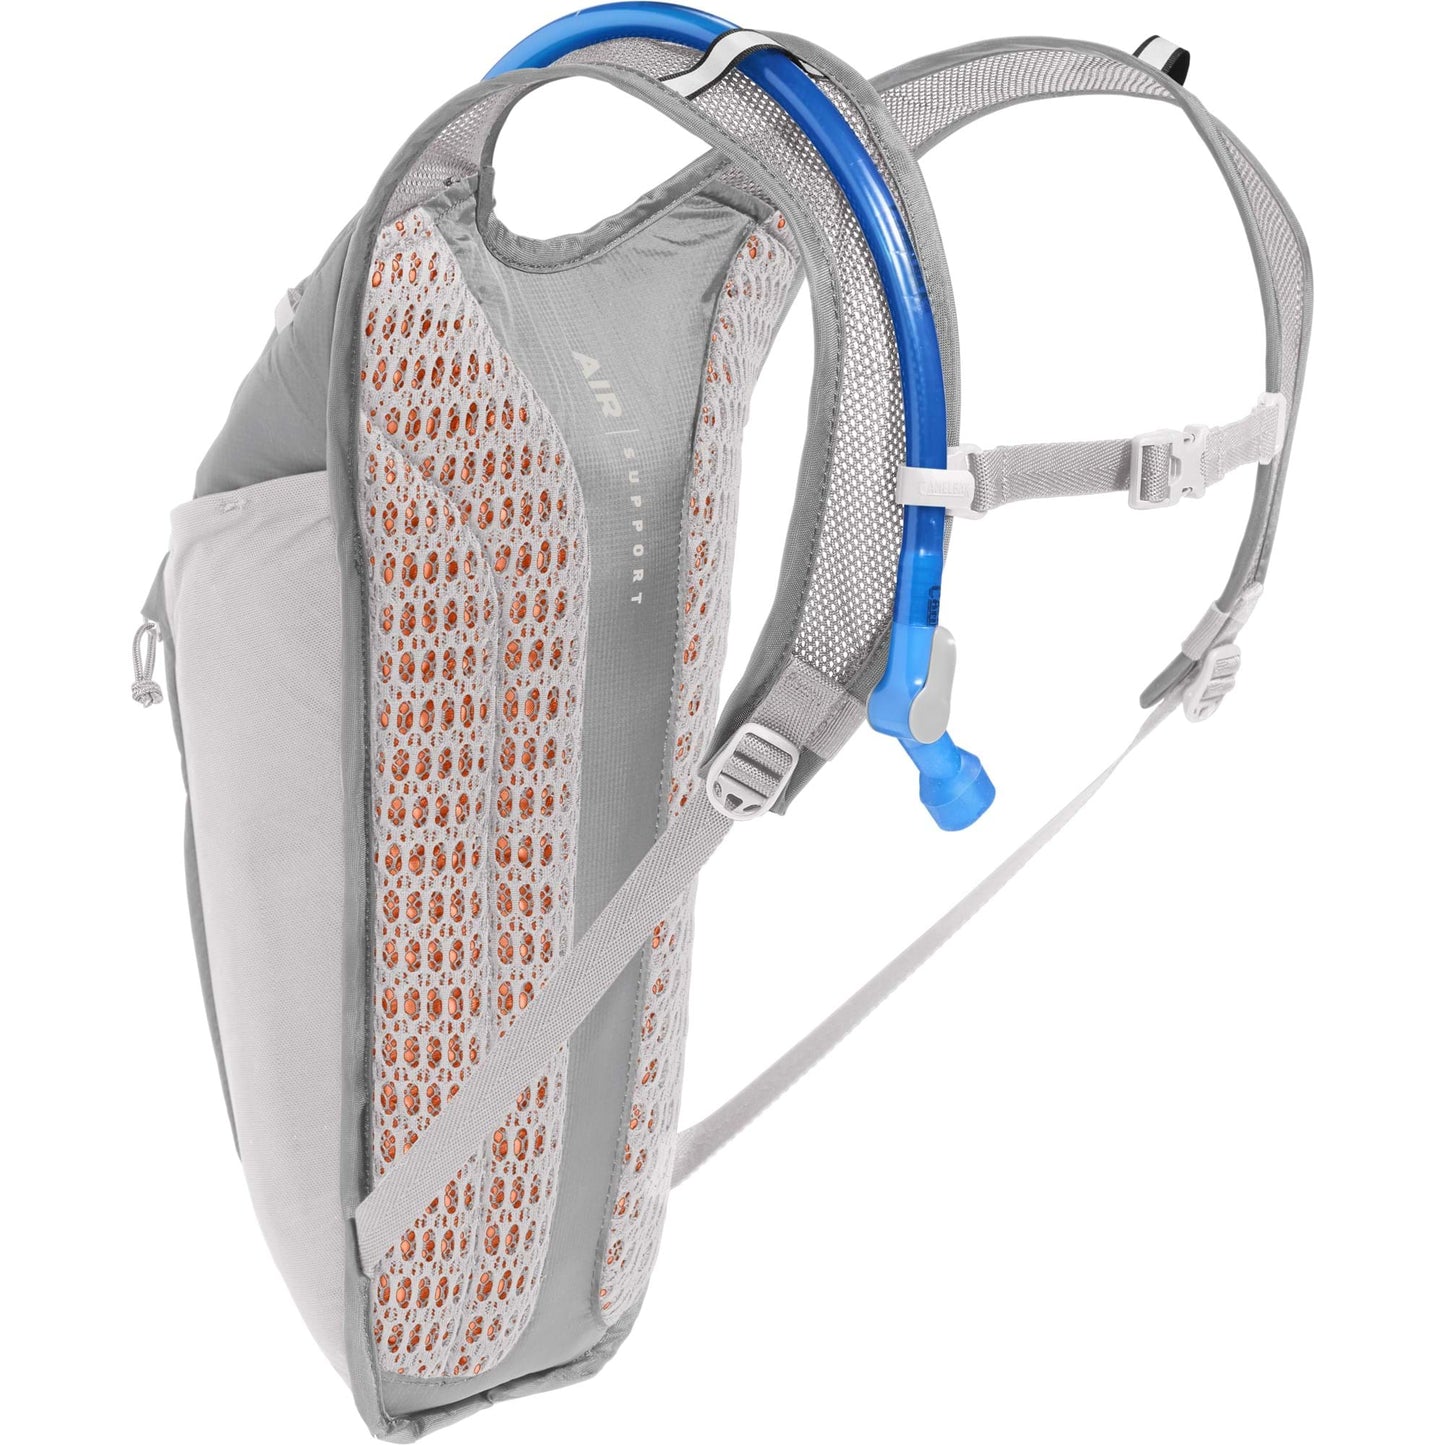 CAMELBAK ROGUE LIGHT HYDRATION BACKPACK - DRIZZLE GREY